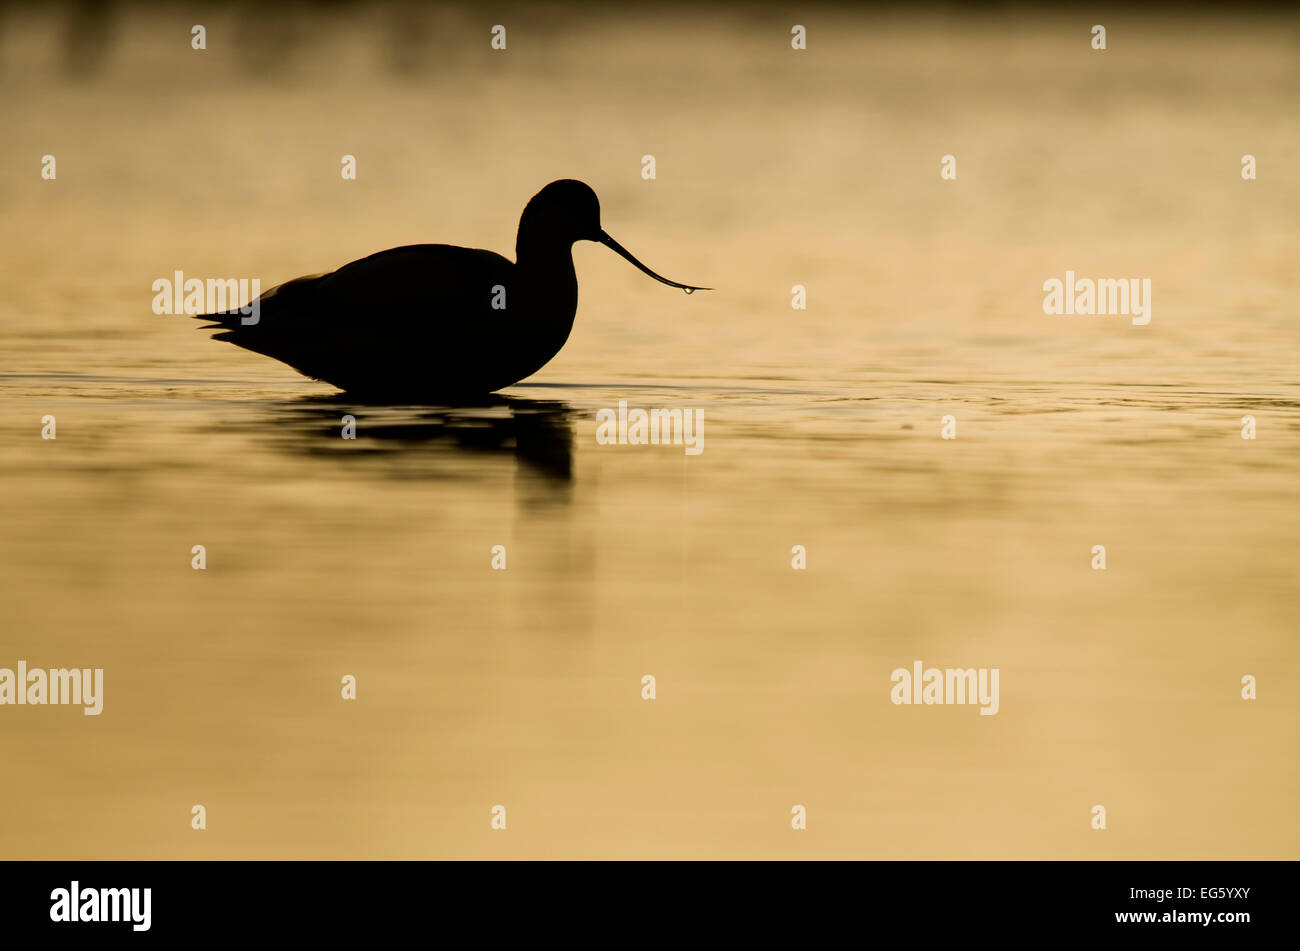 Avocet (Recurvirostra avosetta) silhouetted in water at sunrise, Brownsea Island, Dorset, England, UK, January. 2020VISION Book Plate. Did you know? Avocets went extinct in the UK in 1840, and recolonised the UK over 100 years later. Stock Photo